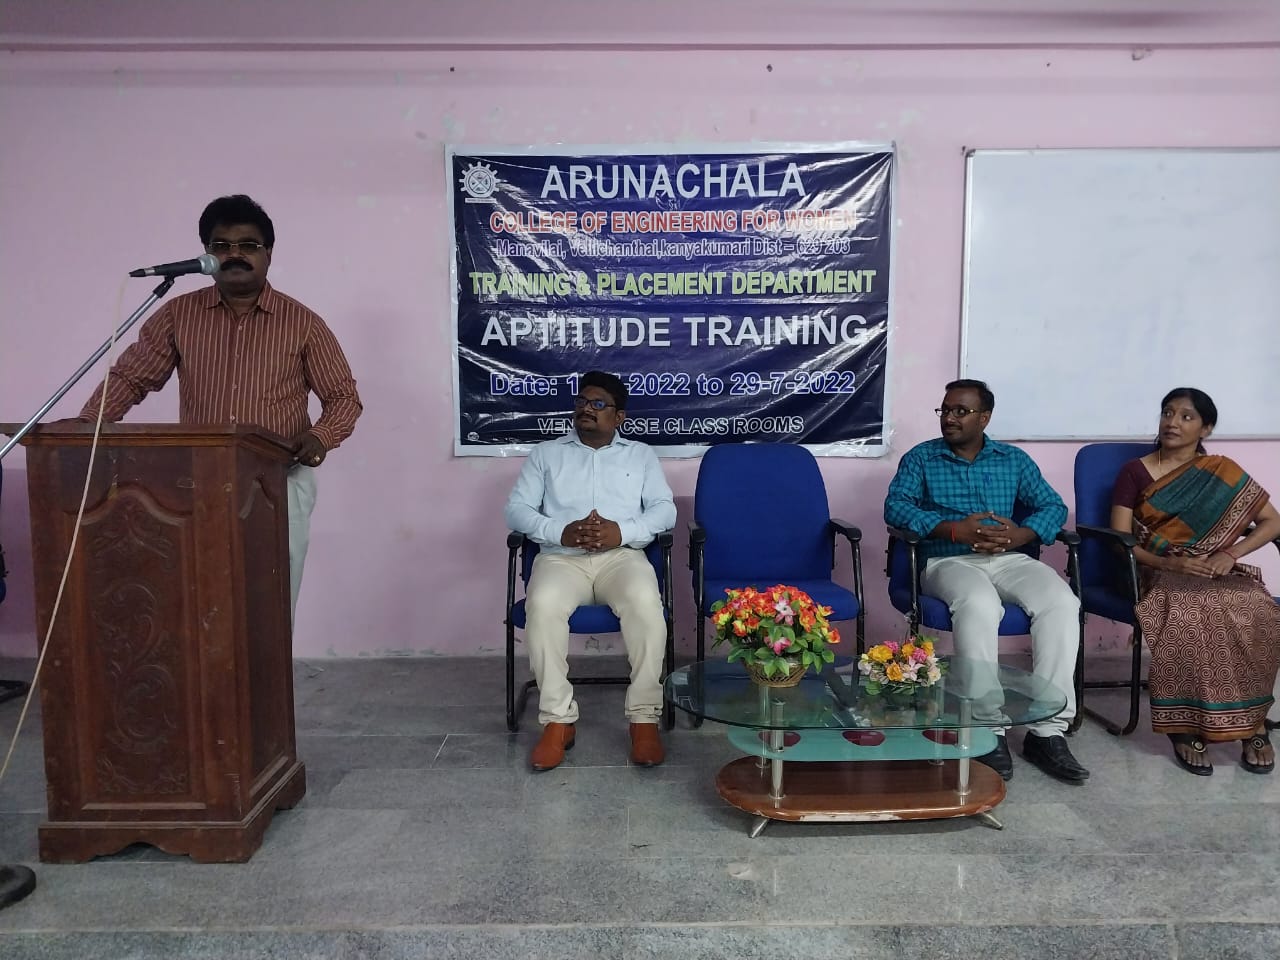 Aptitude Training organized by Training and Placement Department